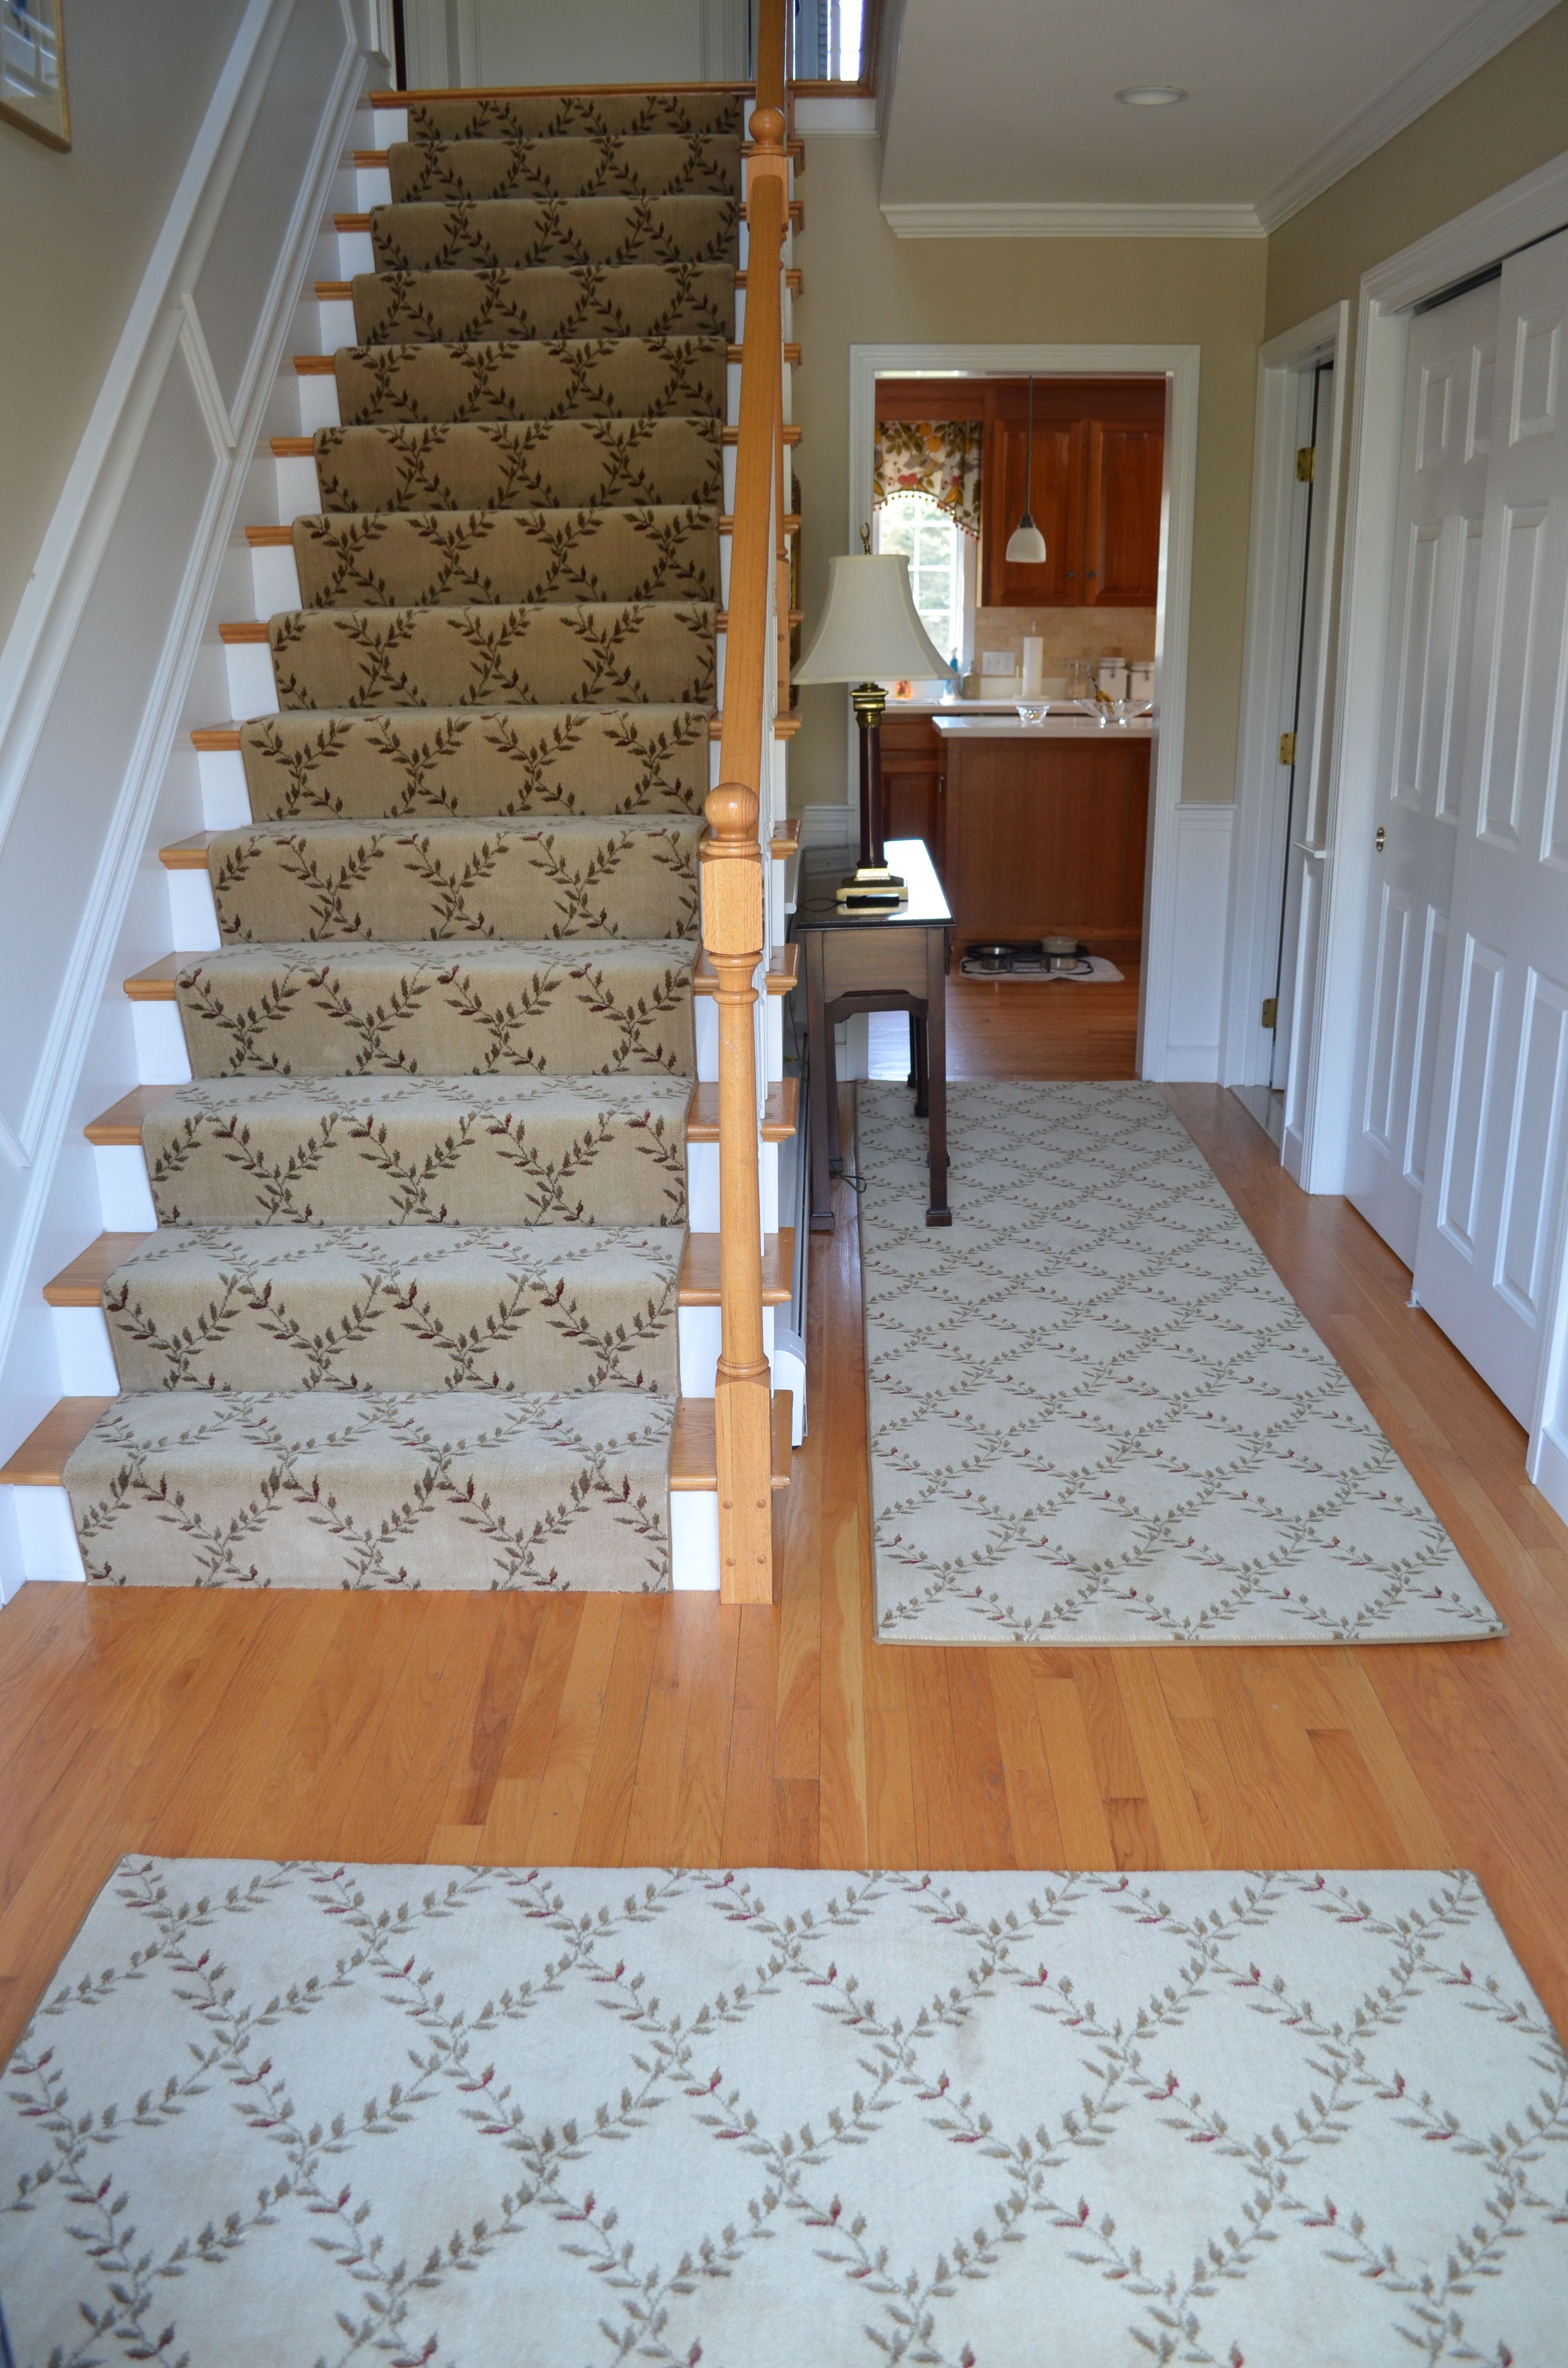 Rug Carpet Stair Treads Lowes Rubber Stair Treads Stair Tread Inside Stair Tread Carpet Runners (View 8 of 20)